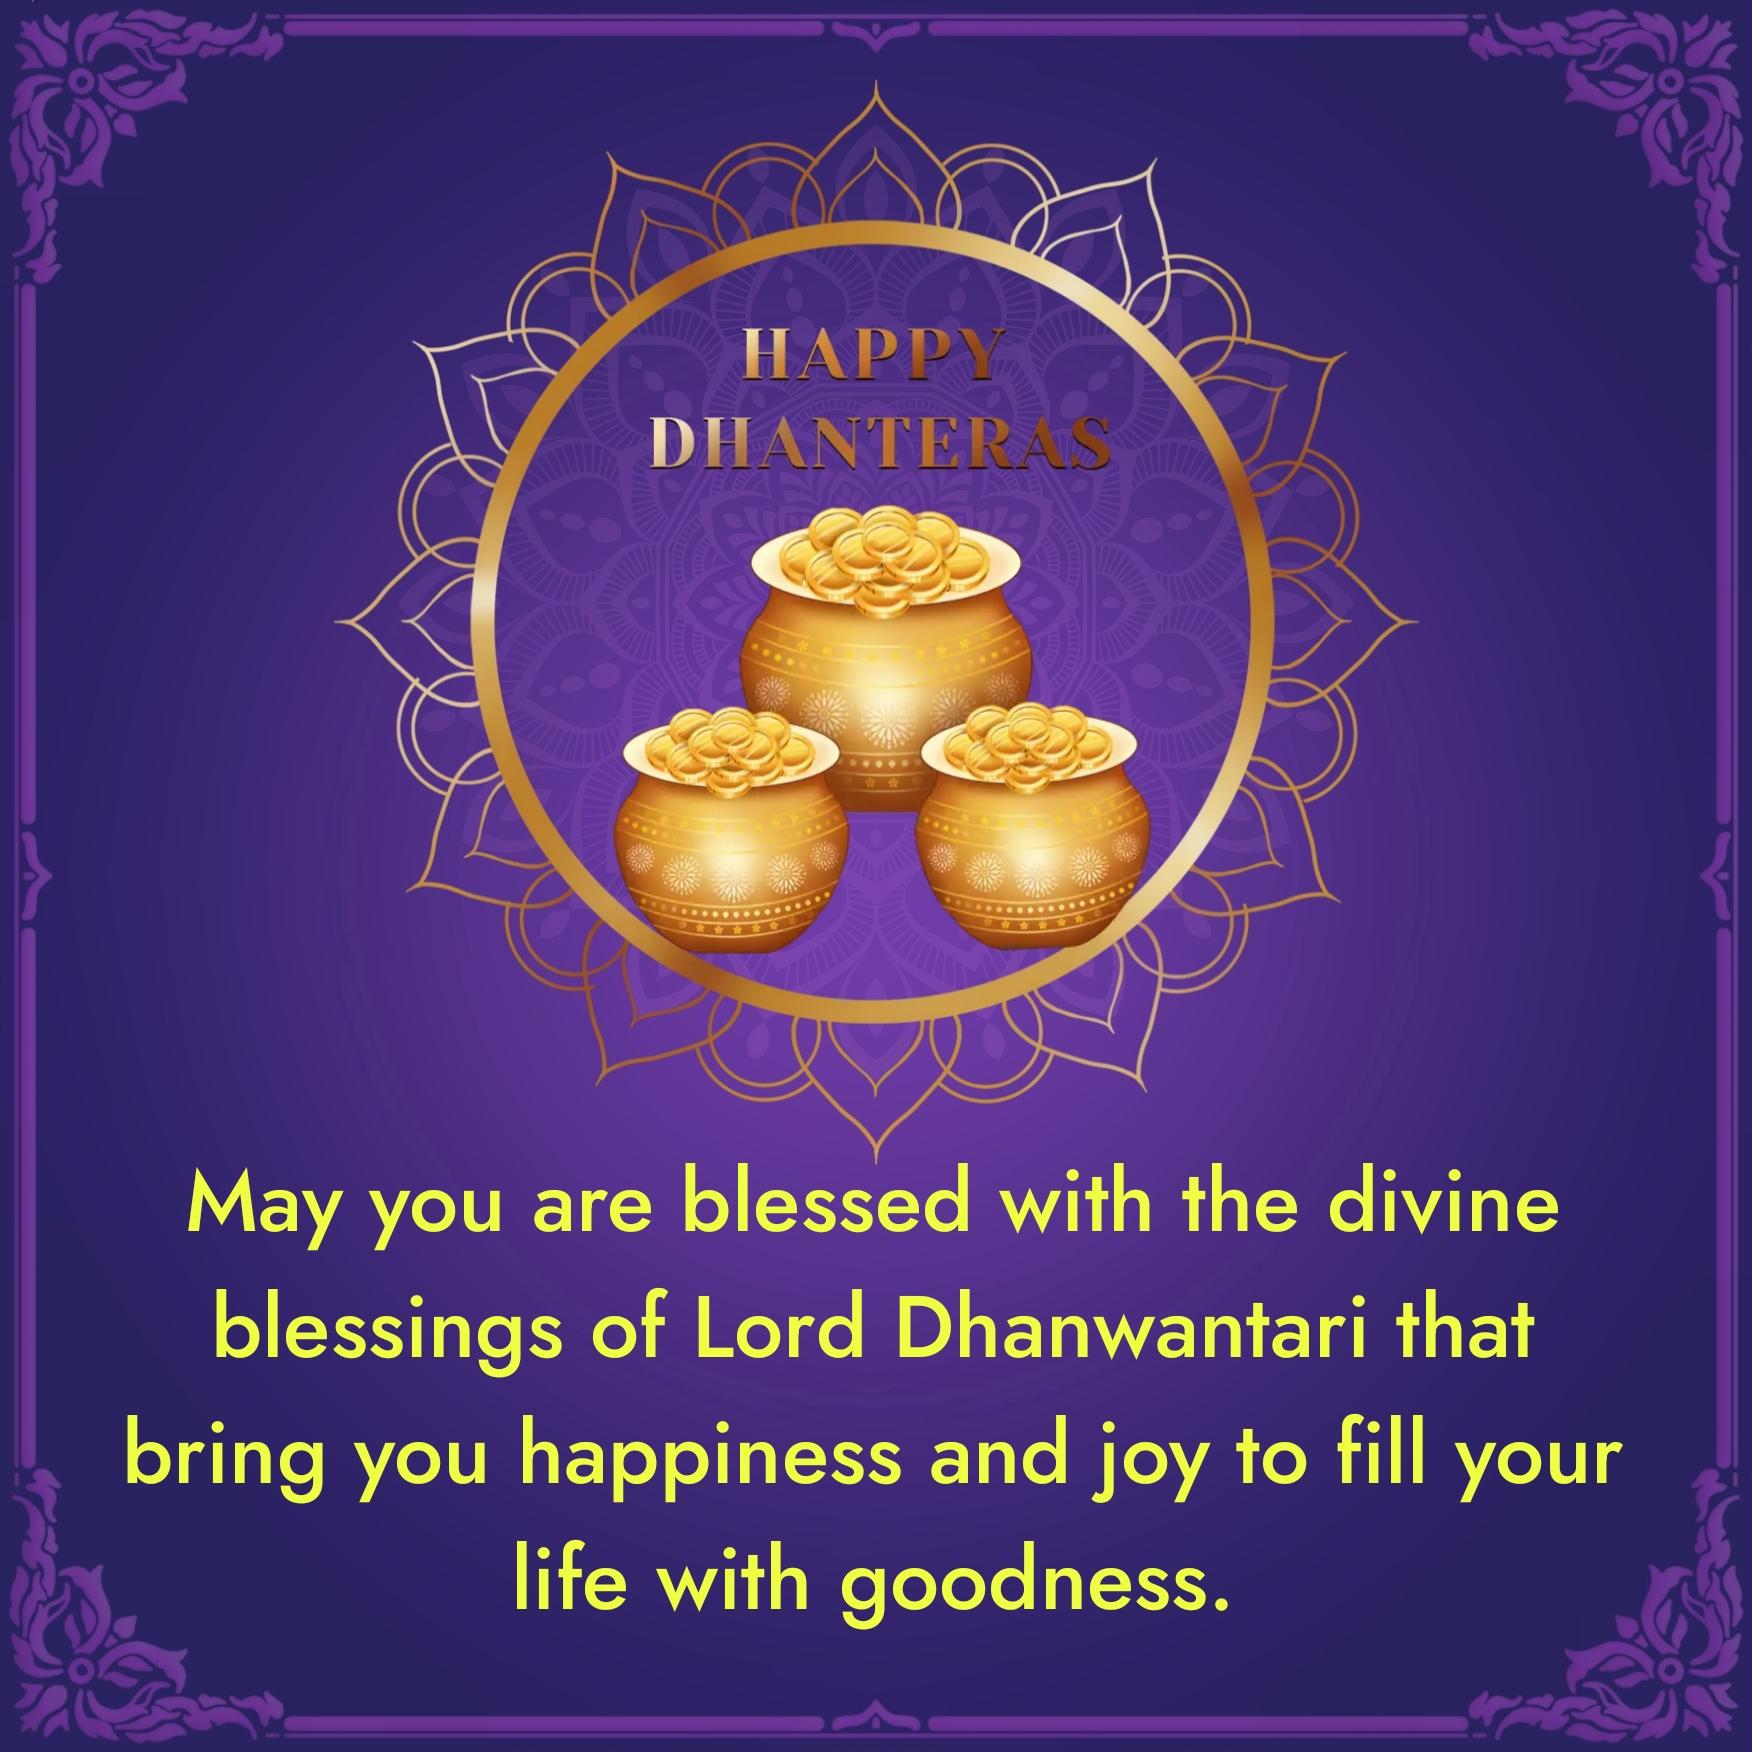 May you are blessed with the divine blessings